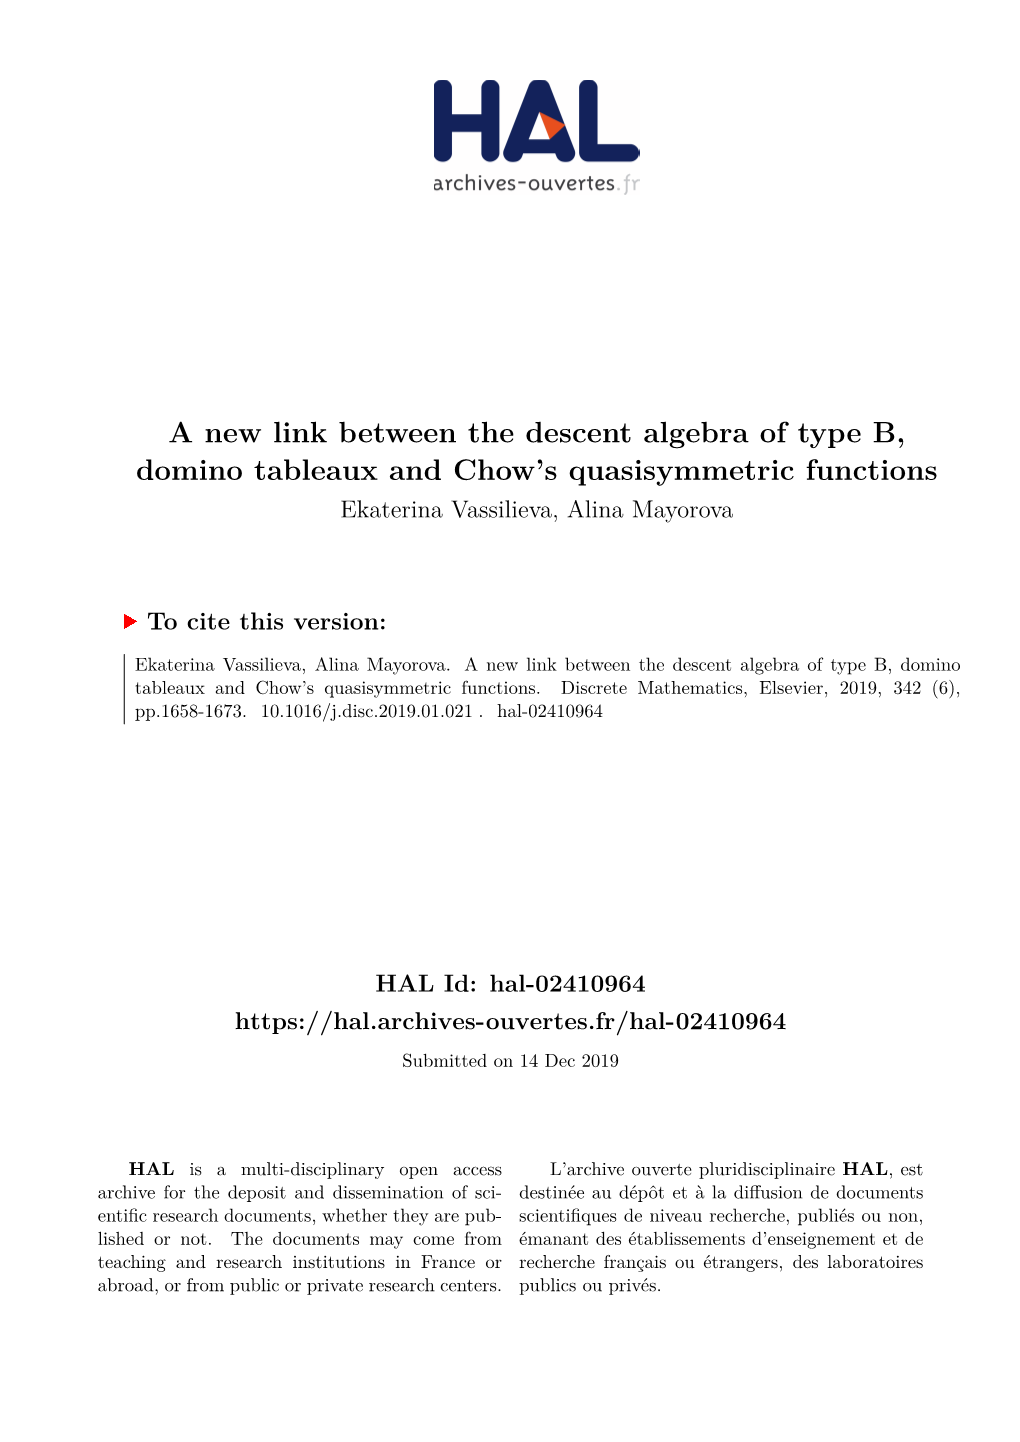 A New Link Between the Descent Algebra of Type B, Domino Tableaux and Chow’S Quasisymmetric Functions Ekaterina Vassilieva, Alina Mayorova